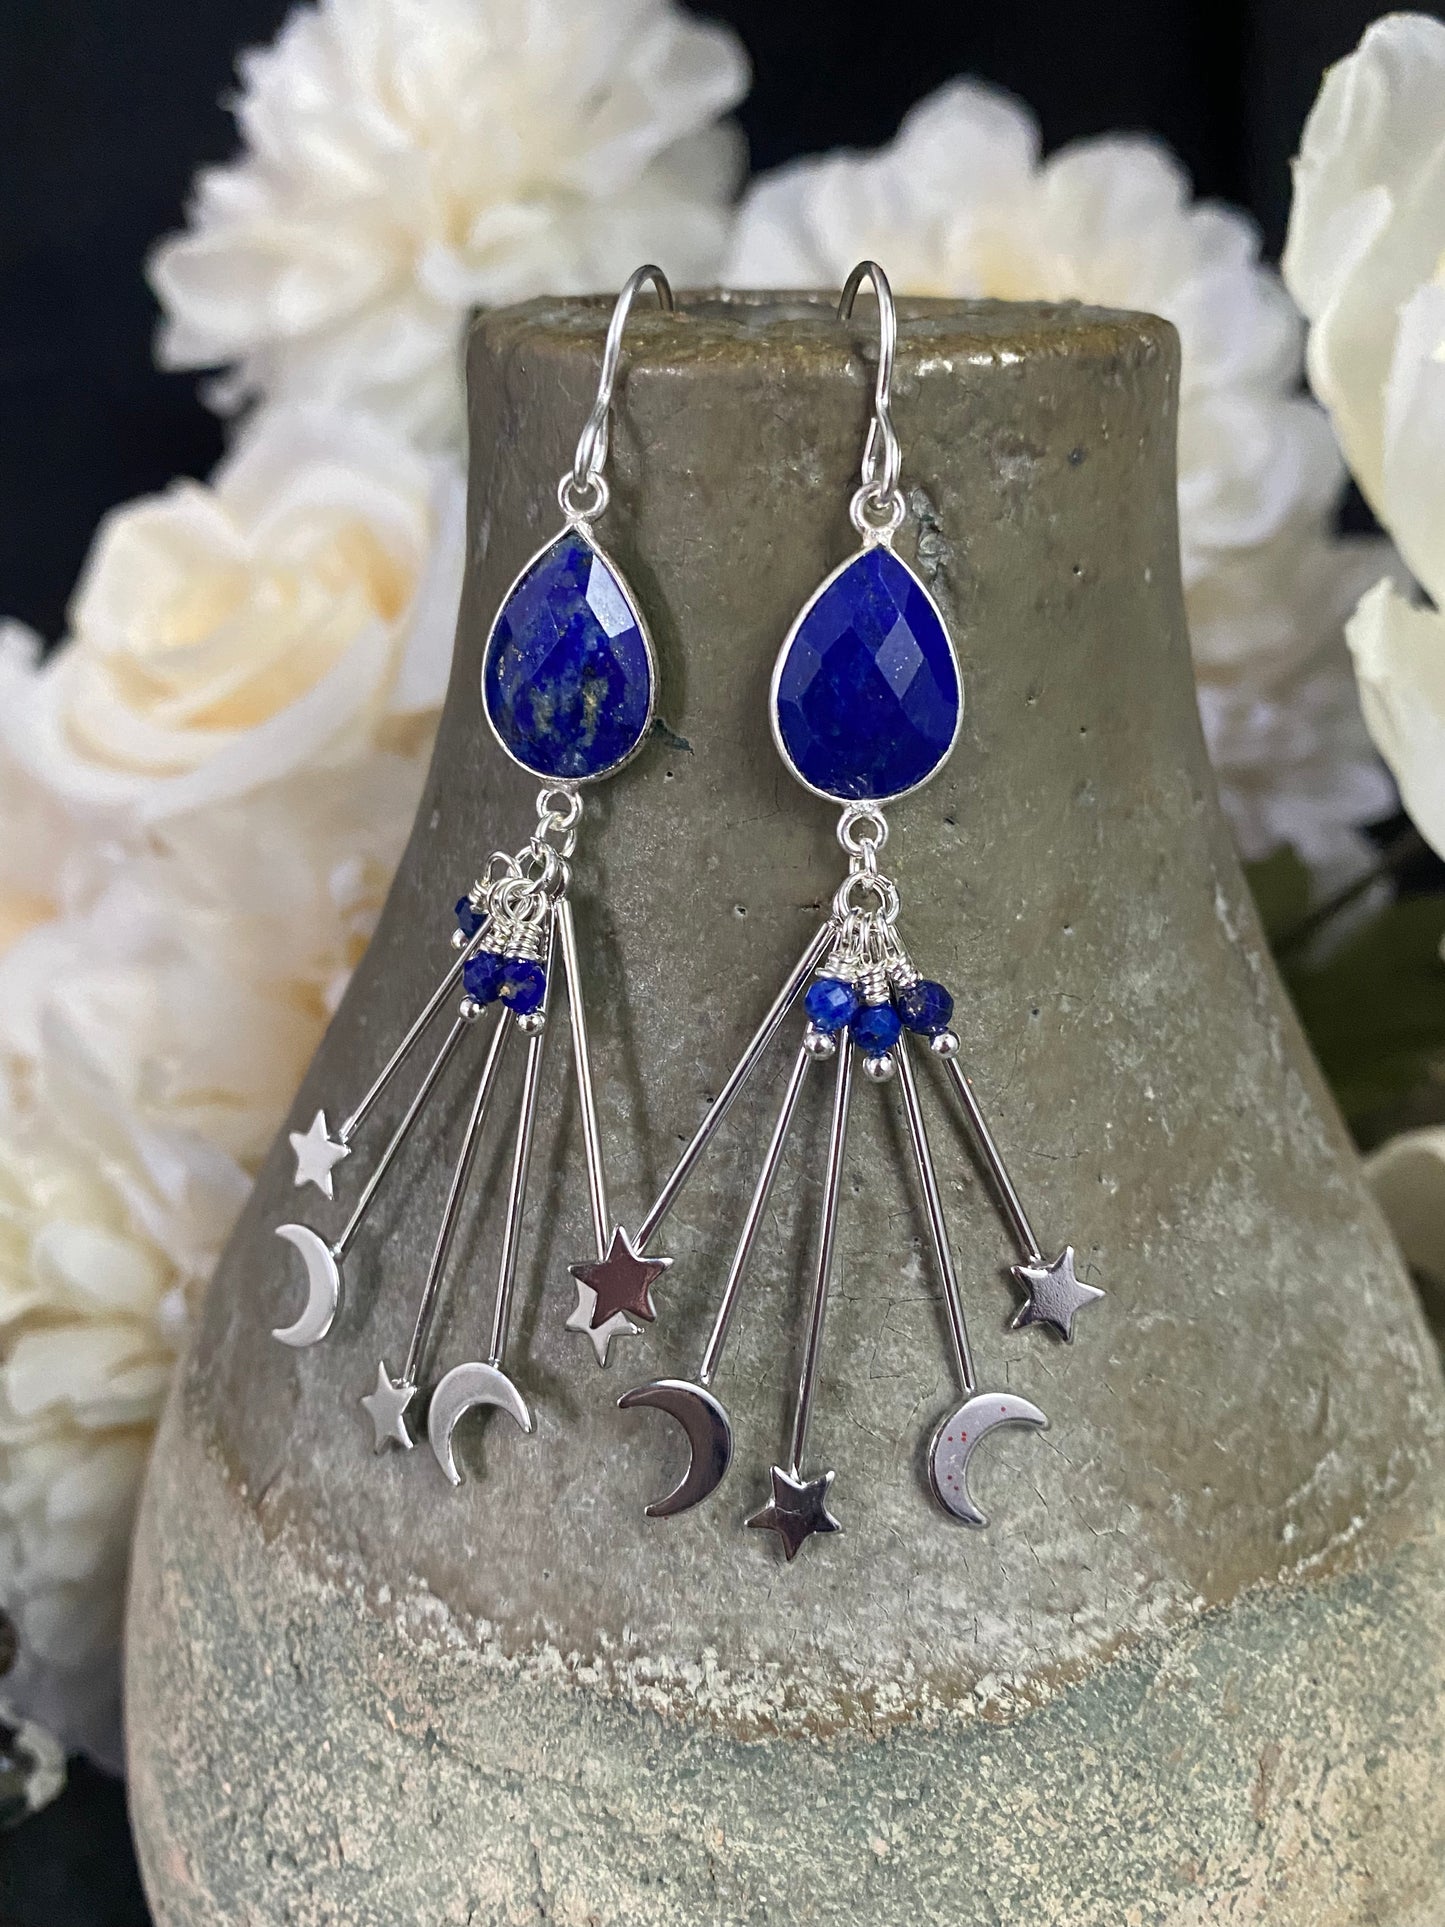 Lapis lazuli stone, moon and stars charms, silver metal, earrings, jewelry